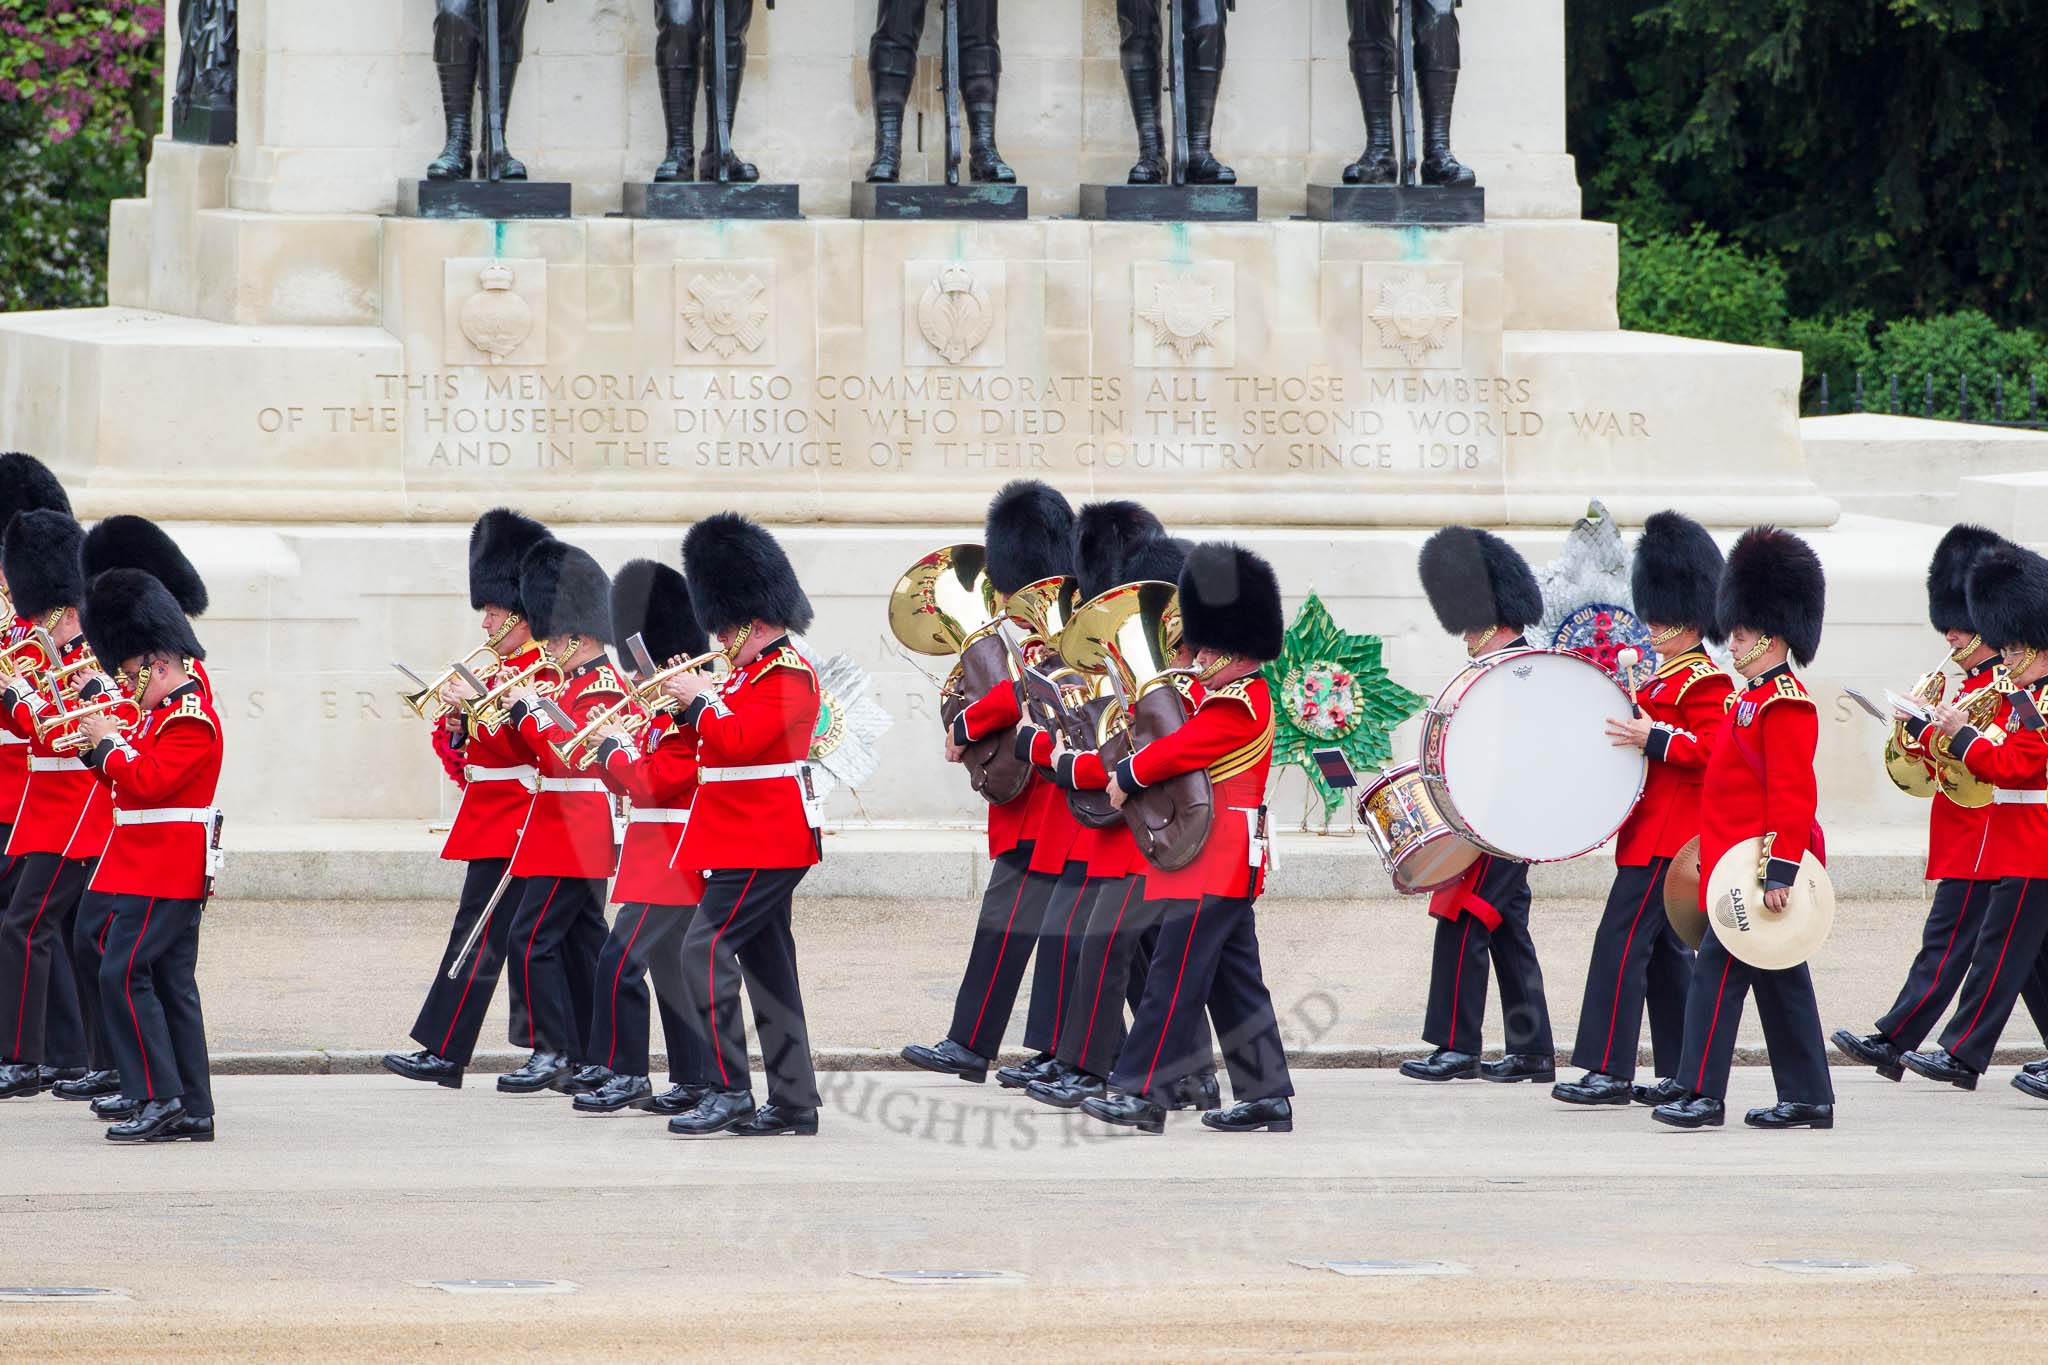 Major General's Review 2013: Musicians of the Band of the Coldstream Guards marching on Horse Guards Road..
Horse Guards Parade, Westminster,
London SW1,

United Kingdom,
on 01 June 2013 at 10:13, image #42